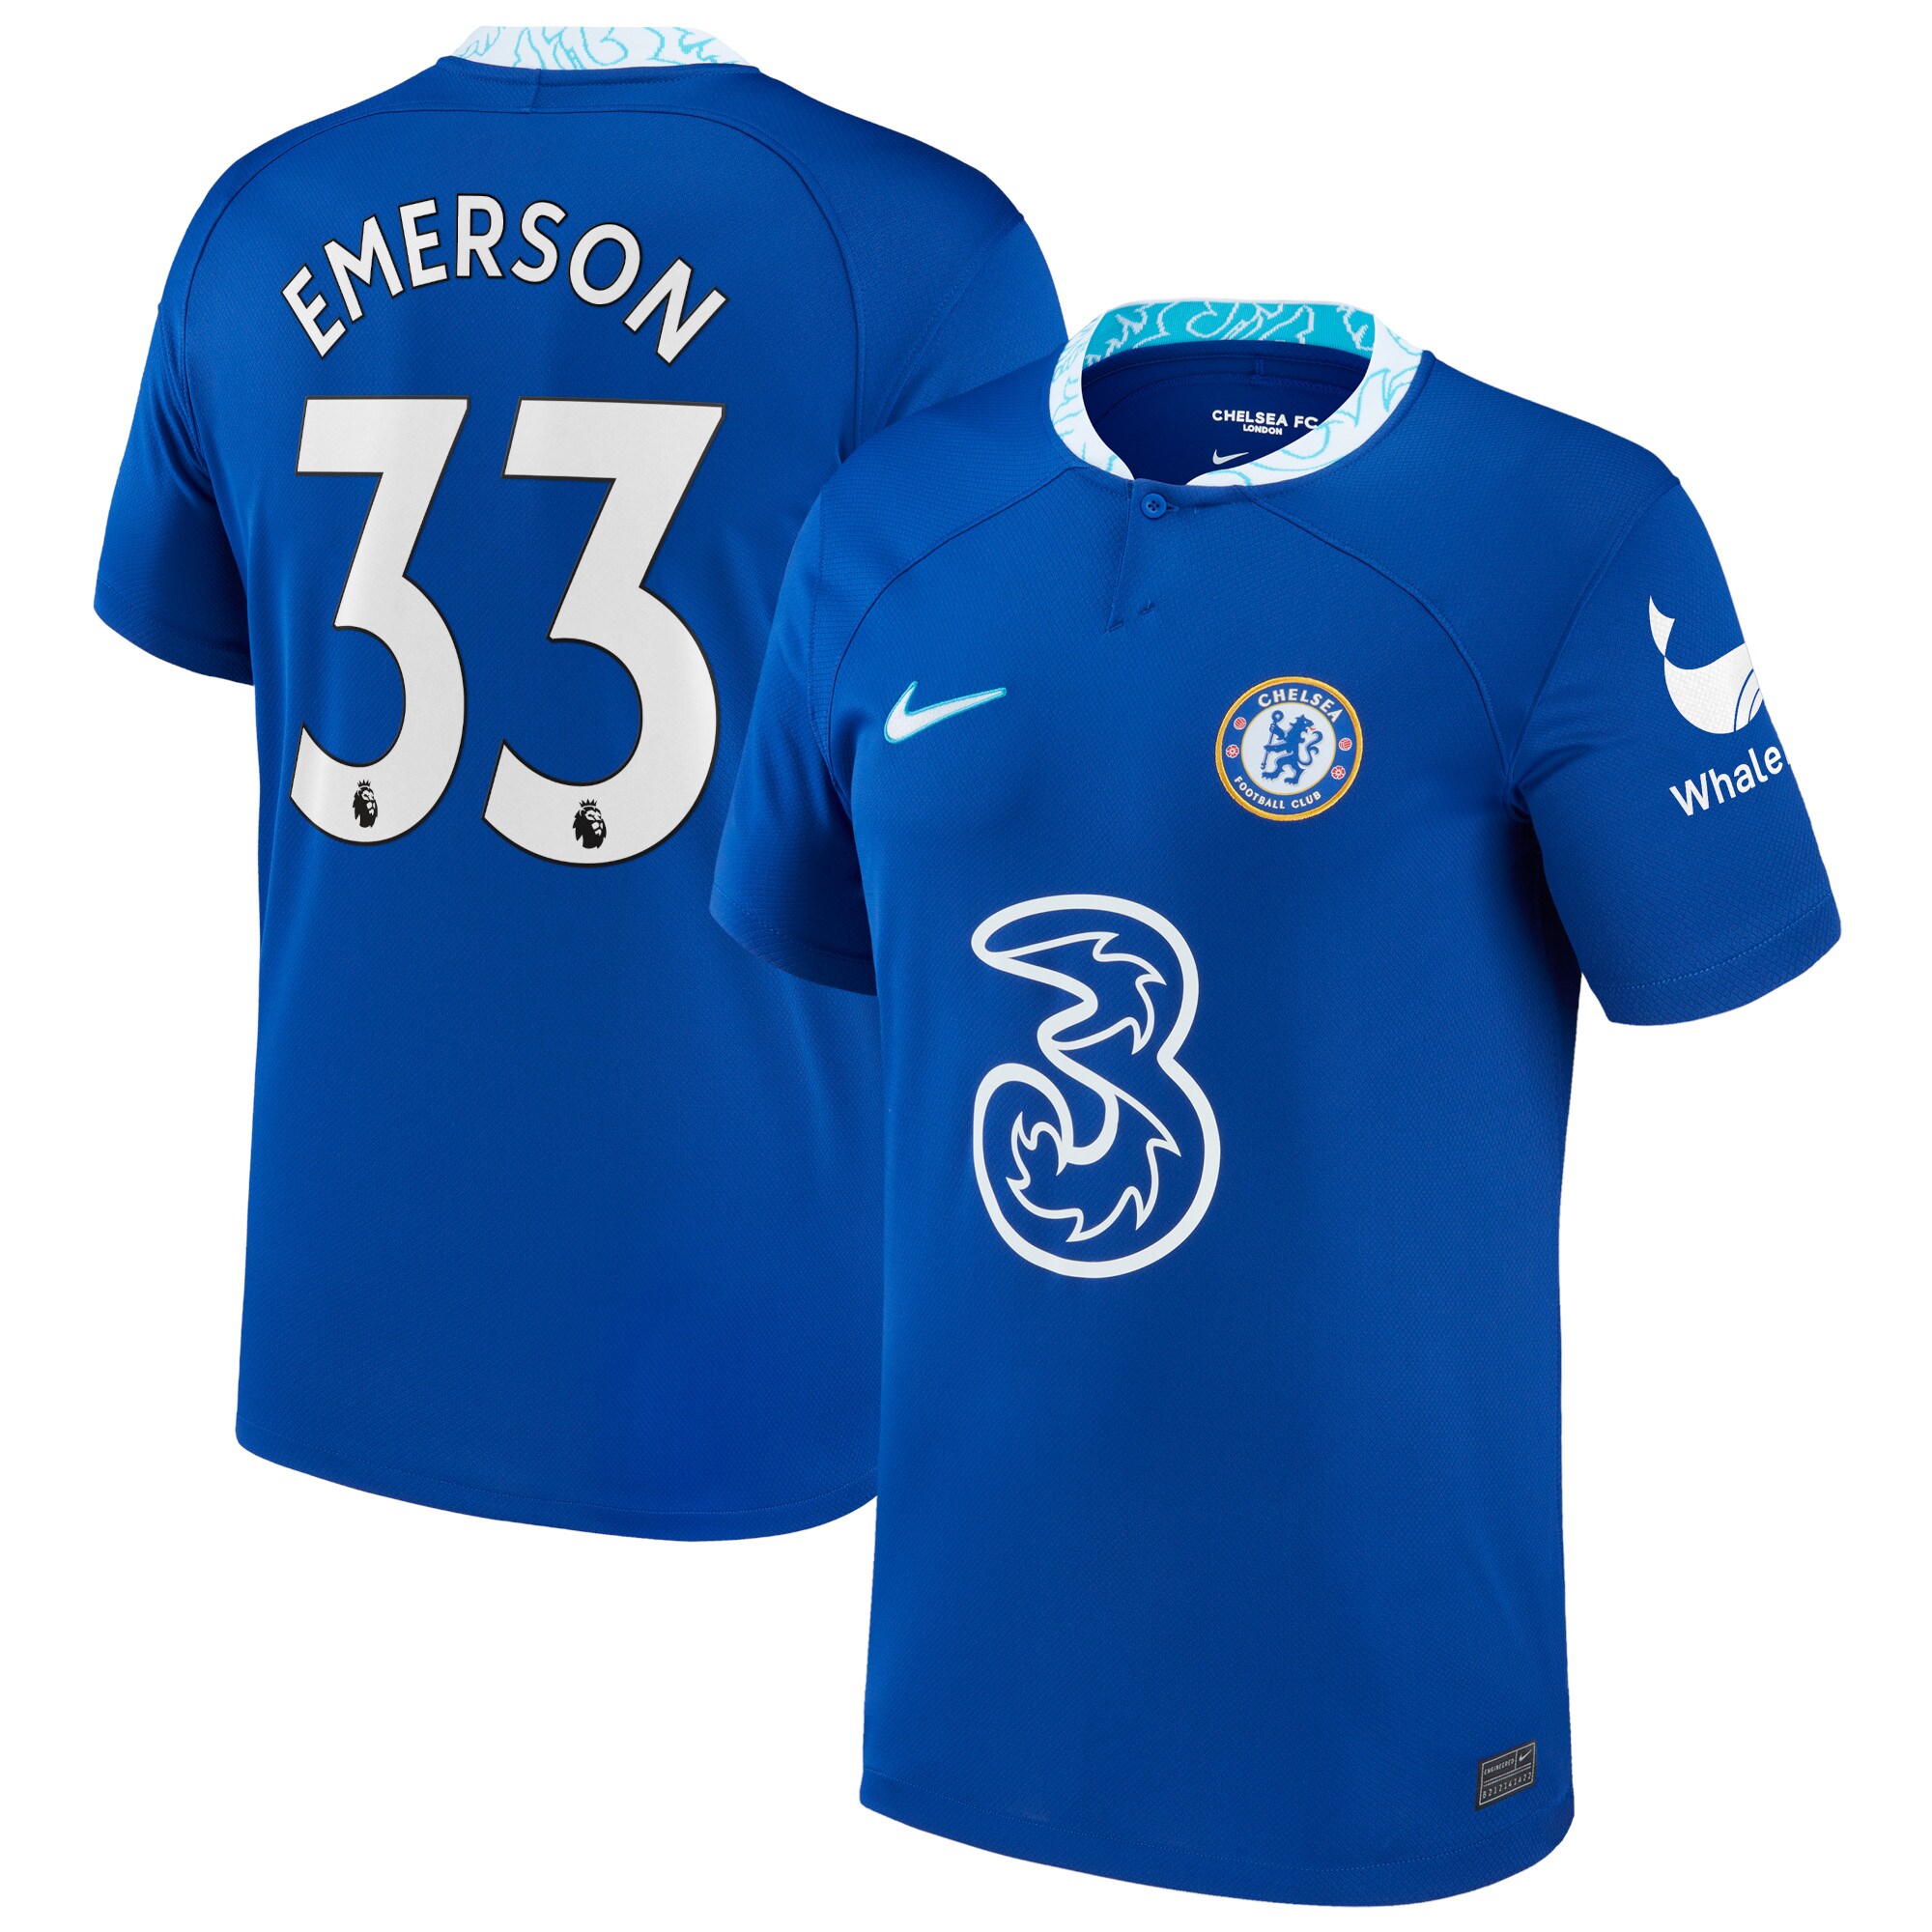 Chelsea Home Stadium Shirt 2022-23 with Emerson 33 printing